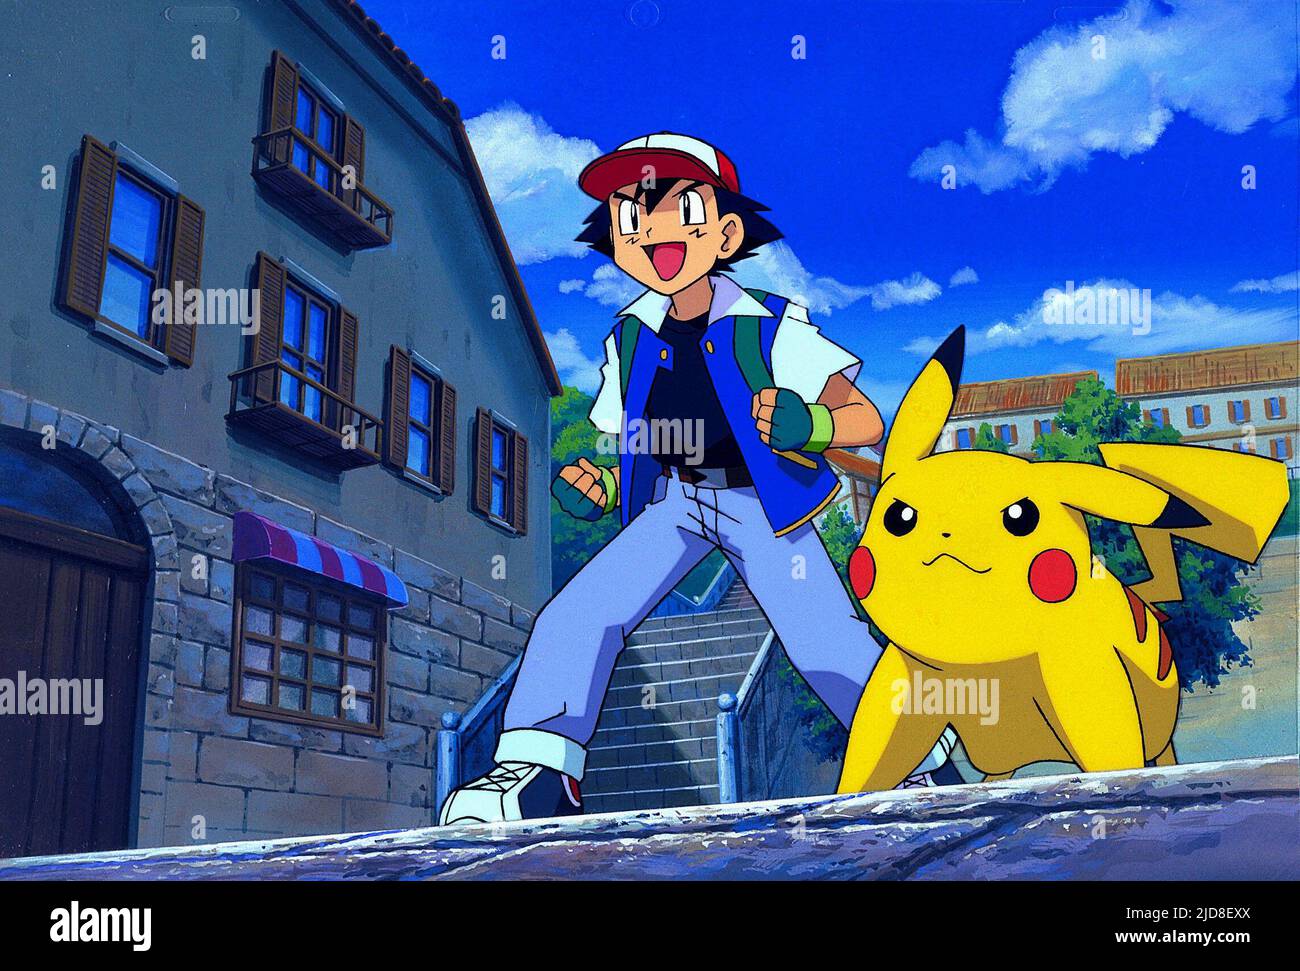 Film Still from Pokemon Poster © 1998 Warner Bros. File Reference #  30996308THA For Editorial Use Only - All Rights Reserved Stock Photo - Alamy